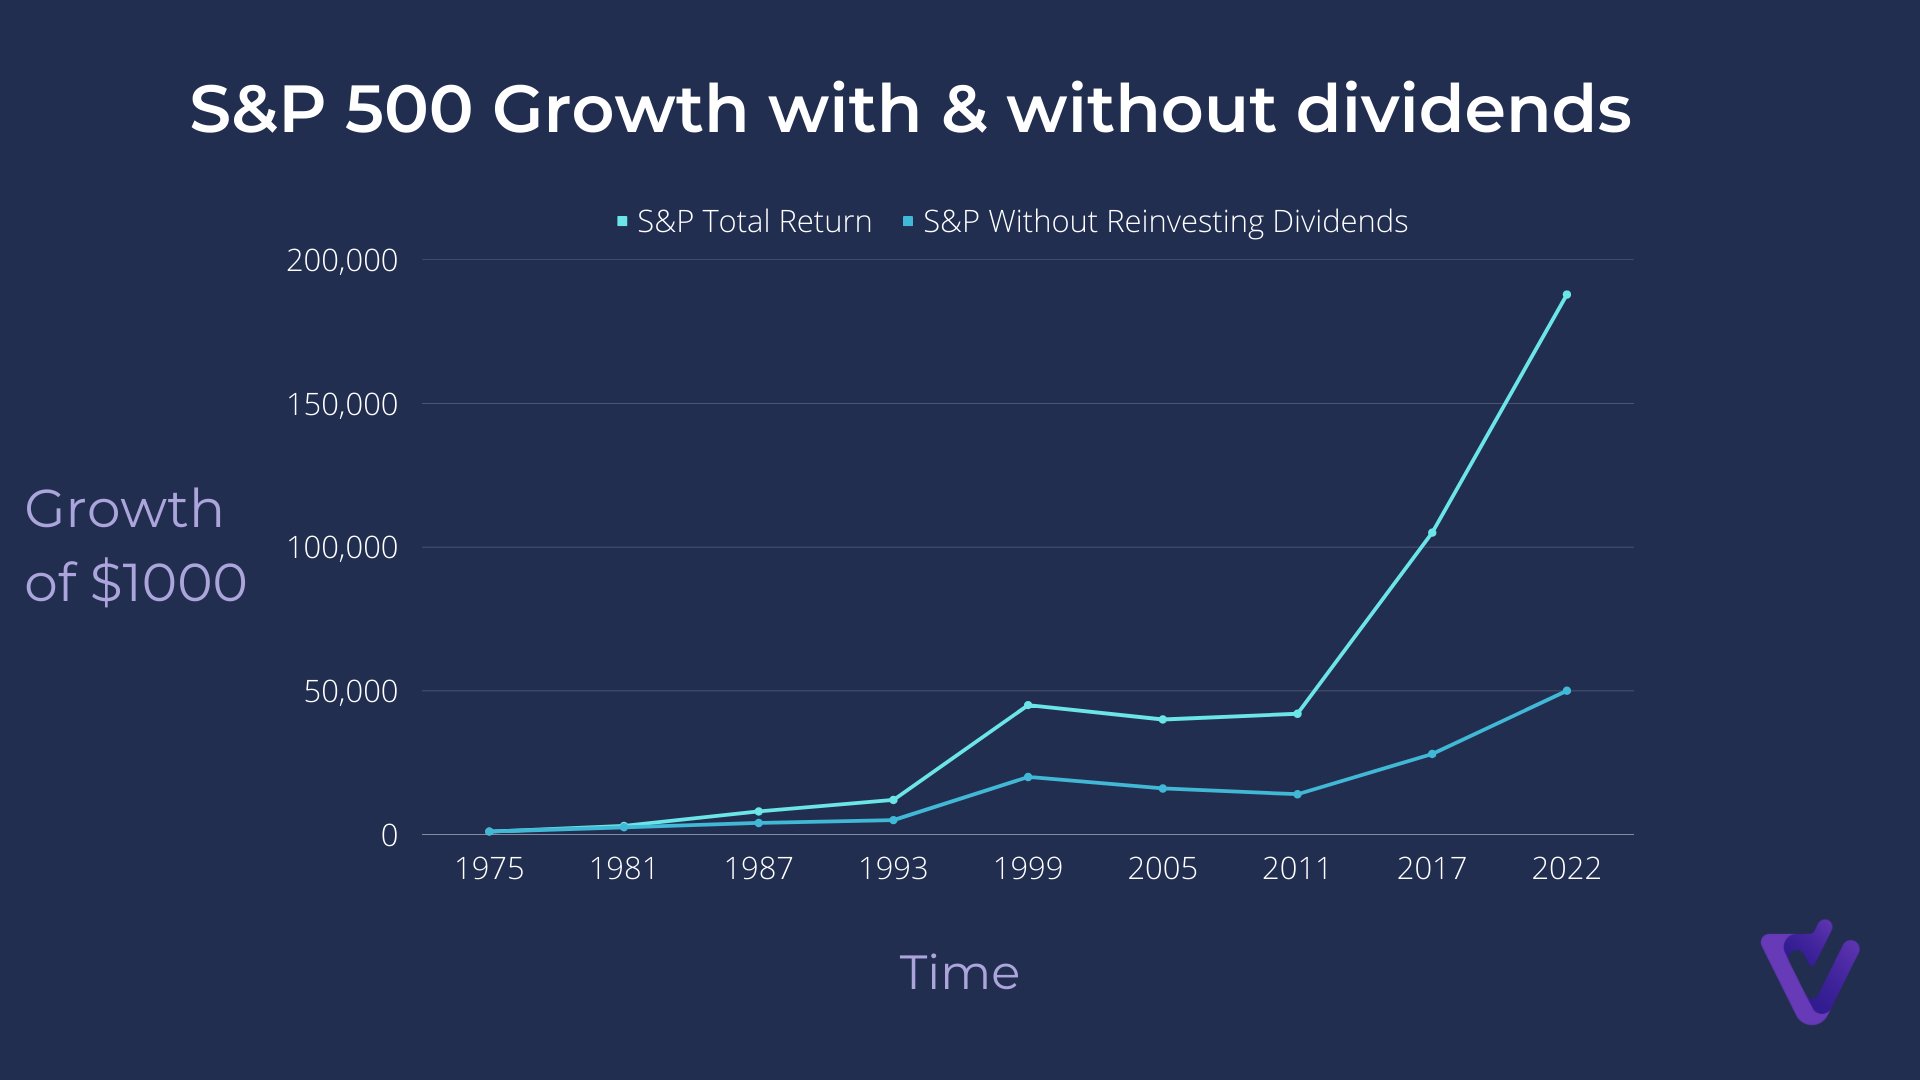 S&amp;P 500 stock market growth with and without reinvesting dividends